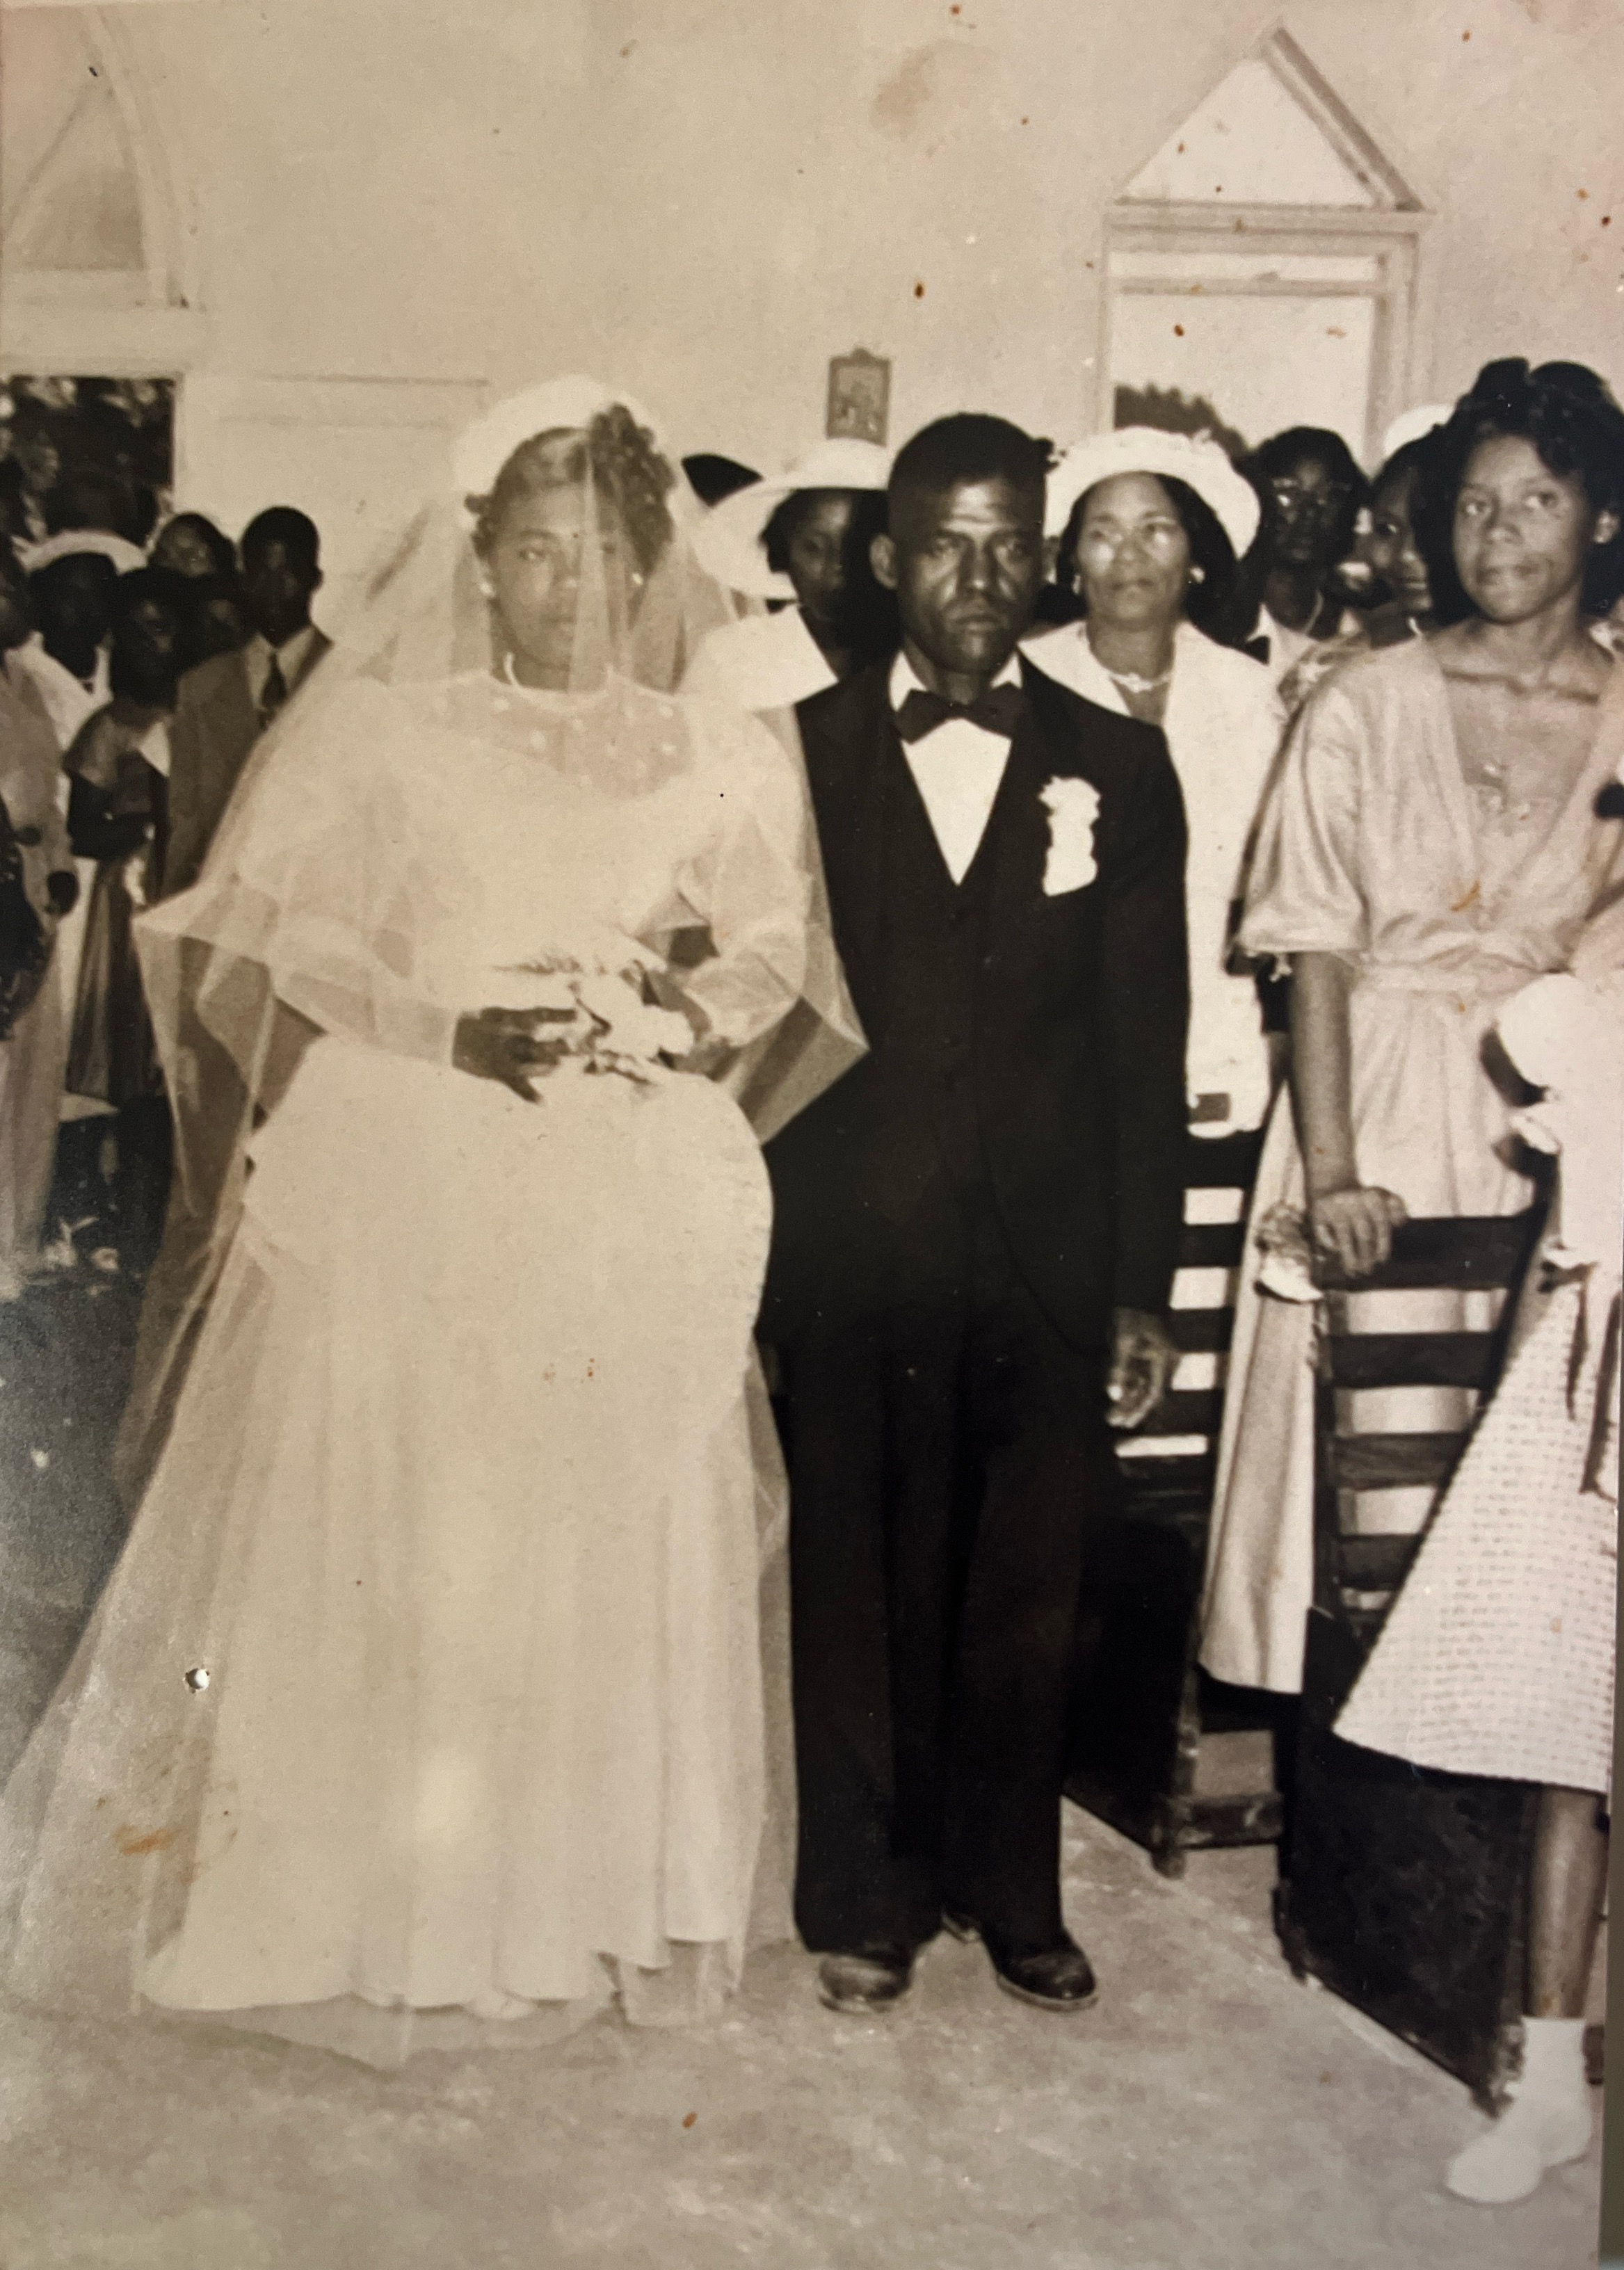 Norman and Helen Wedding Day, Escorted by ISSAC TAYLOR,SR.
       April 1953